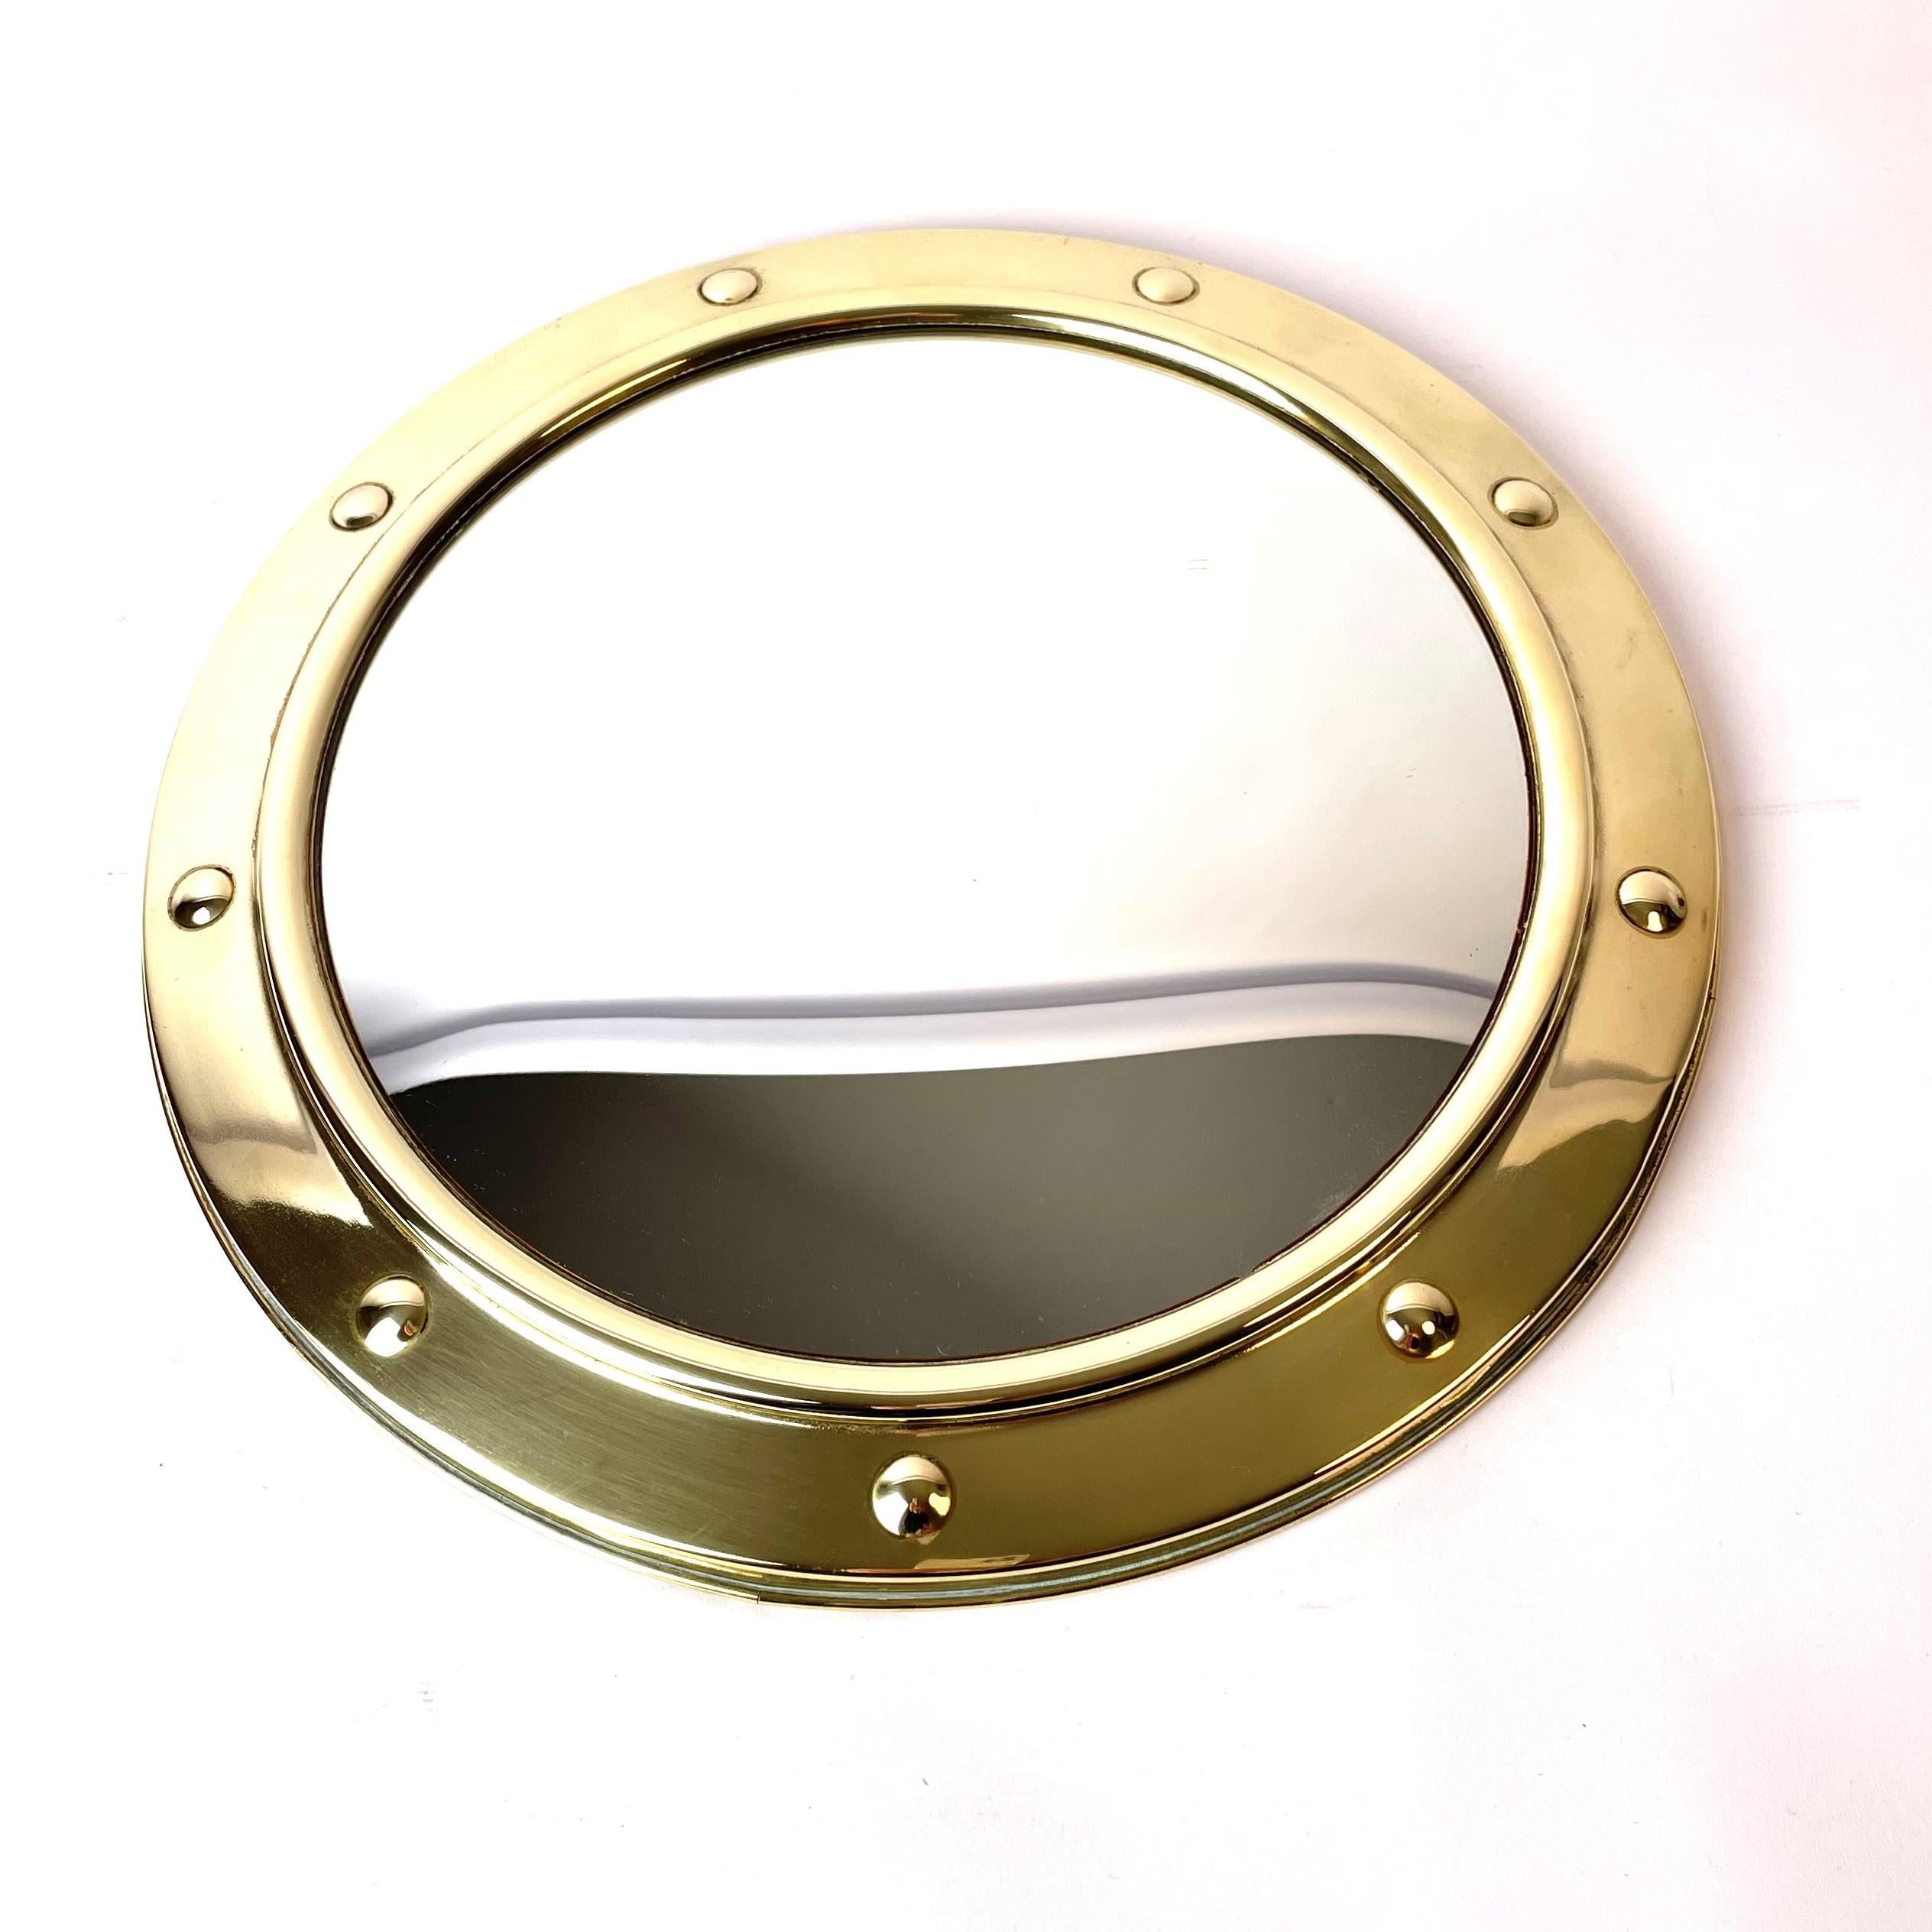 A beautiful mid-20th century porthole convex wall mirror in brass, made by Linton in England, probably in 1940s-1950s.

The mirror is in good condition, but has a small dent on the underside of the mirror (see picture). The dent is not visible